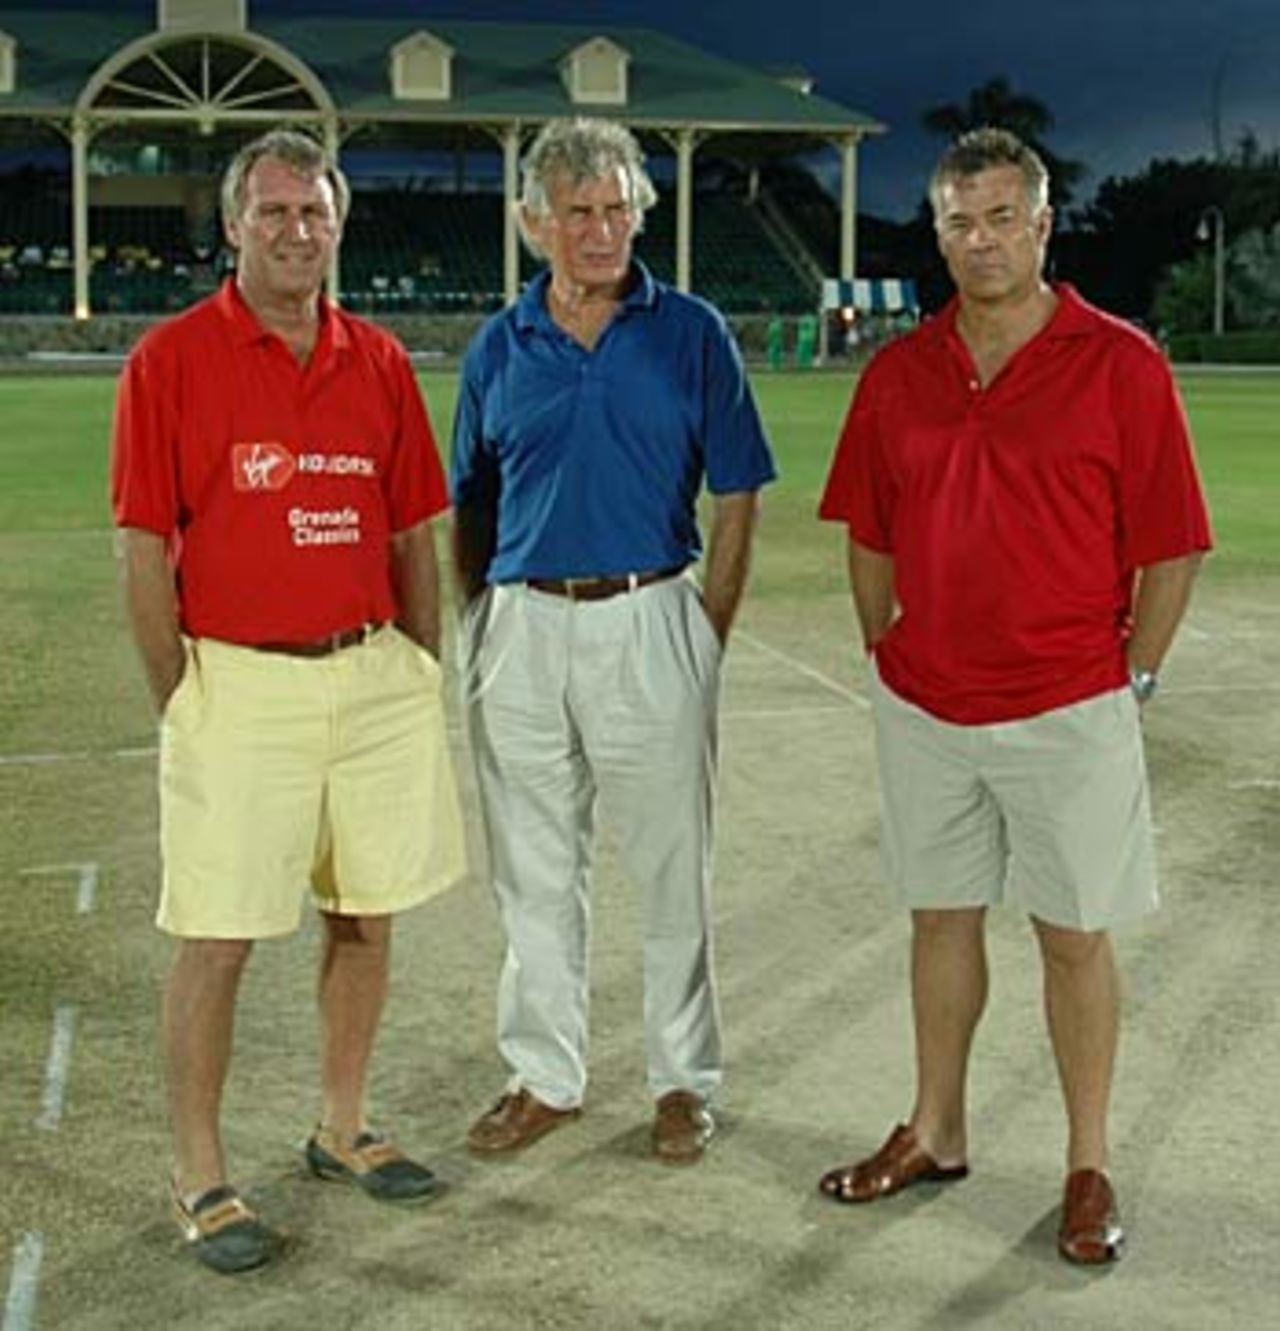 John Lever, John Snow and Neal Radford at the Antigua Independence Festival, Stanford Oval, November 2005